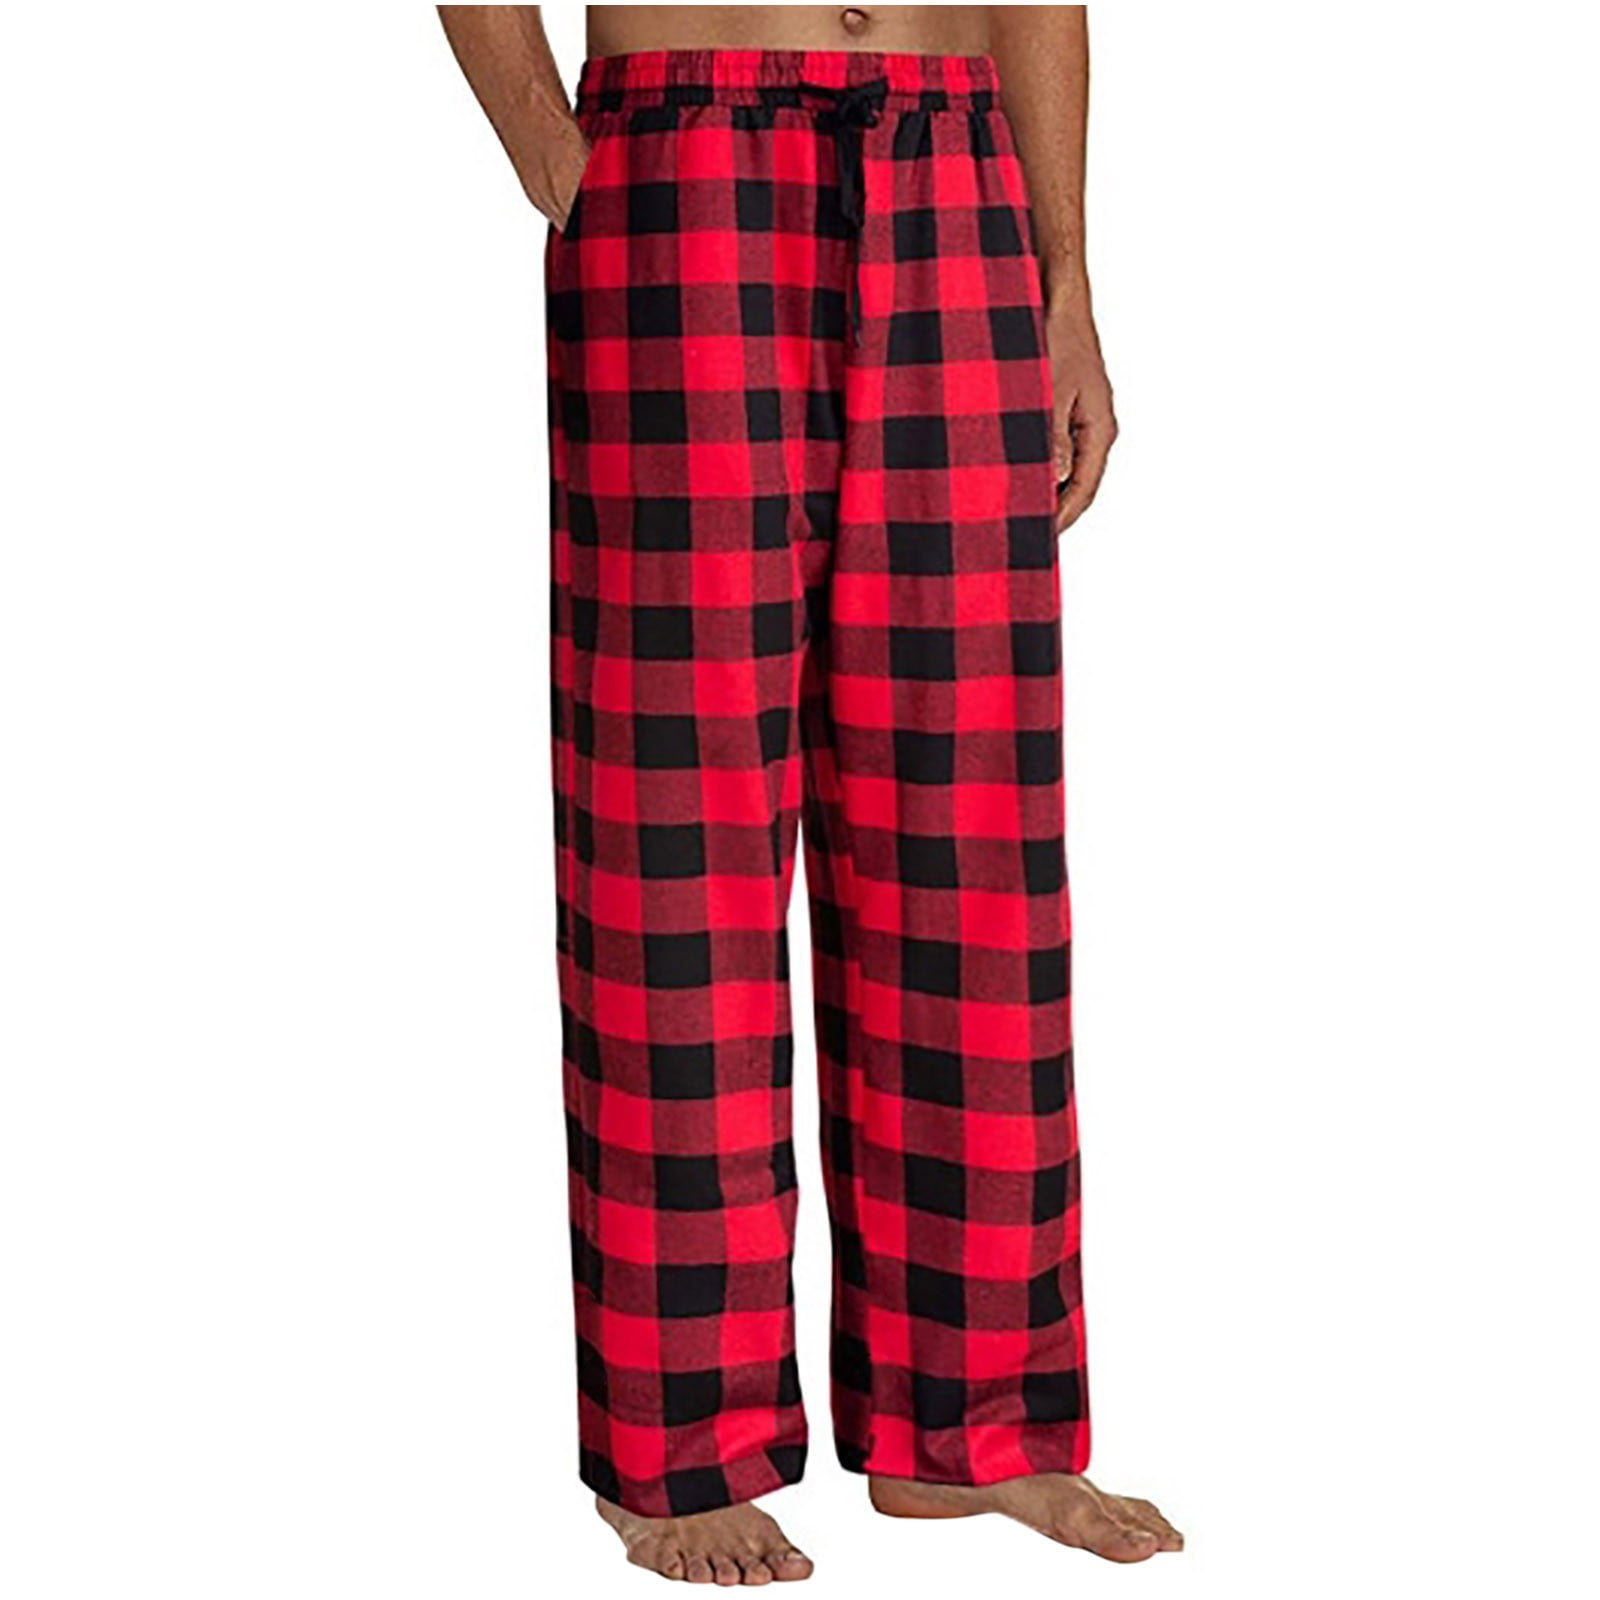 Reduced Price and Clearance Sale Juebong Fashion Men\'s Casual Plaid Loose  Sport Plaid Pajama Pants Trousers,Red,L